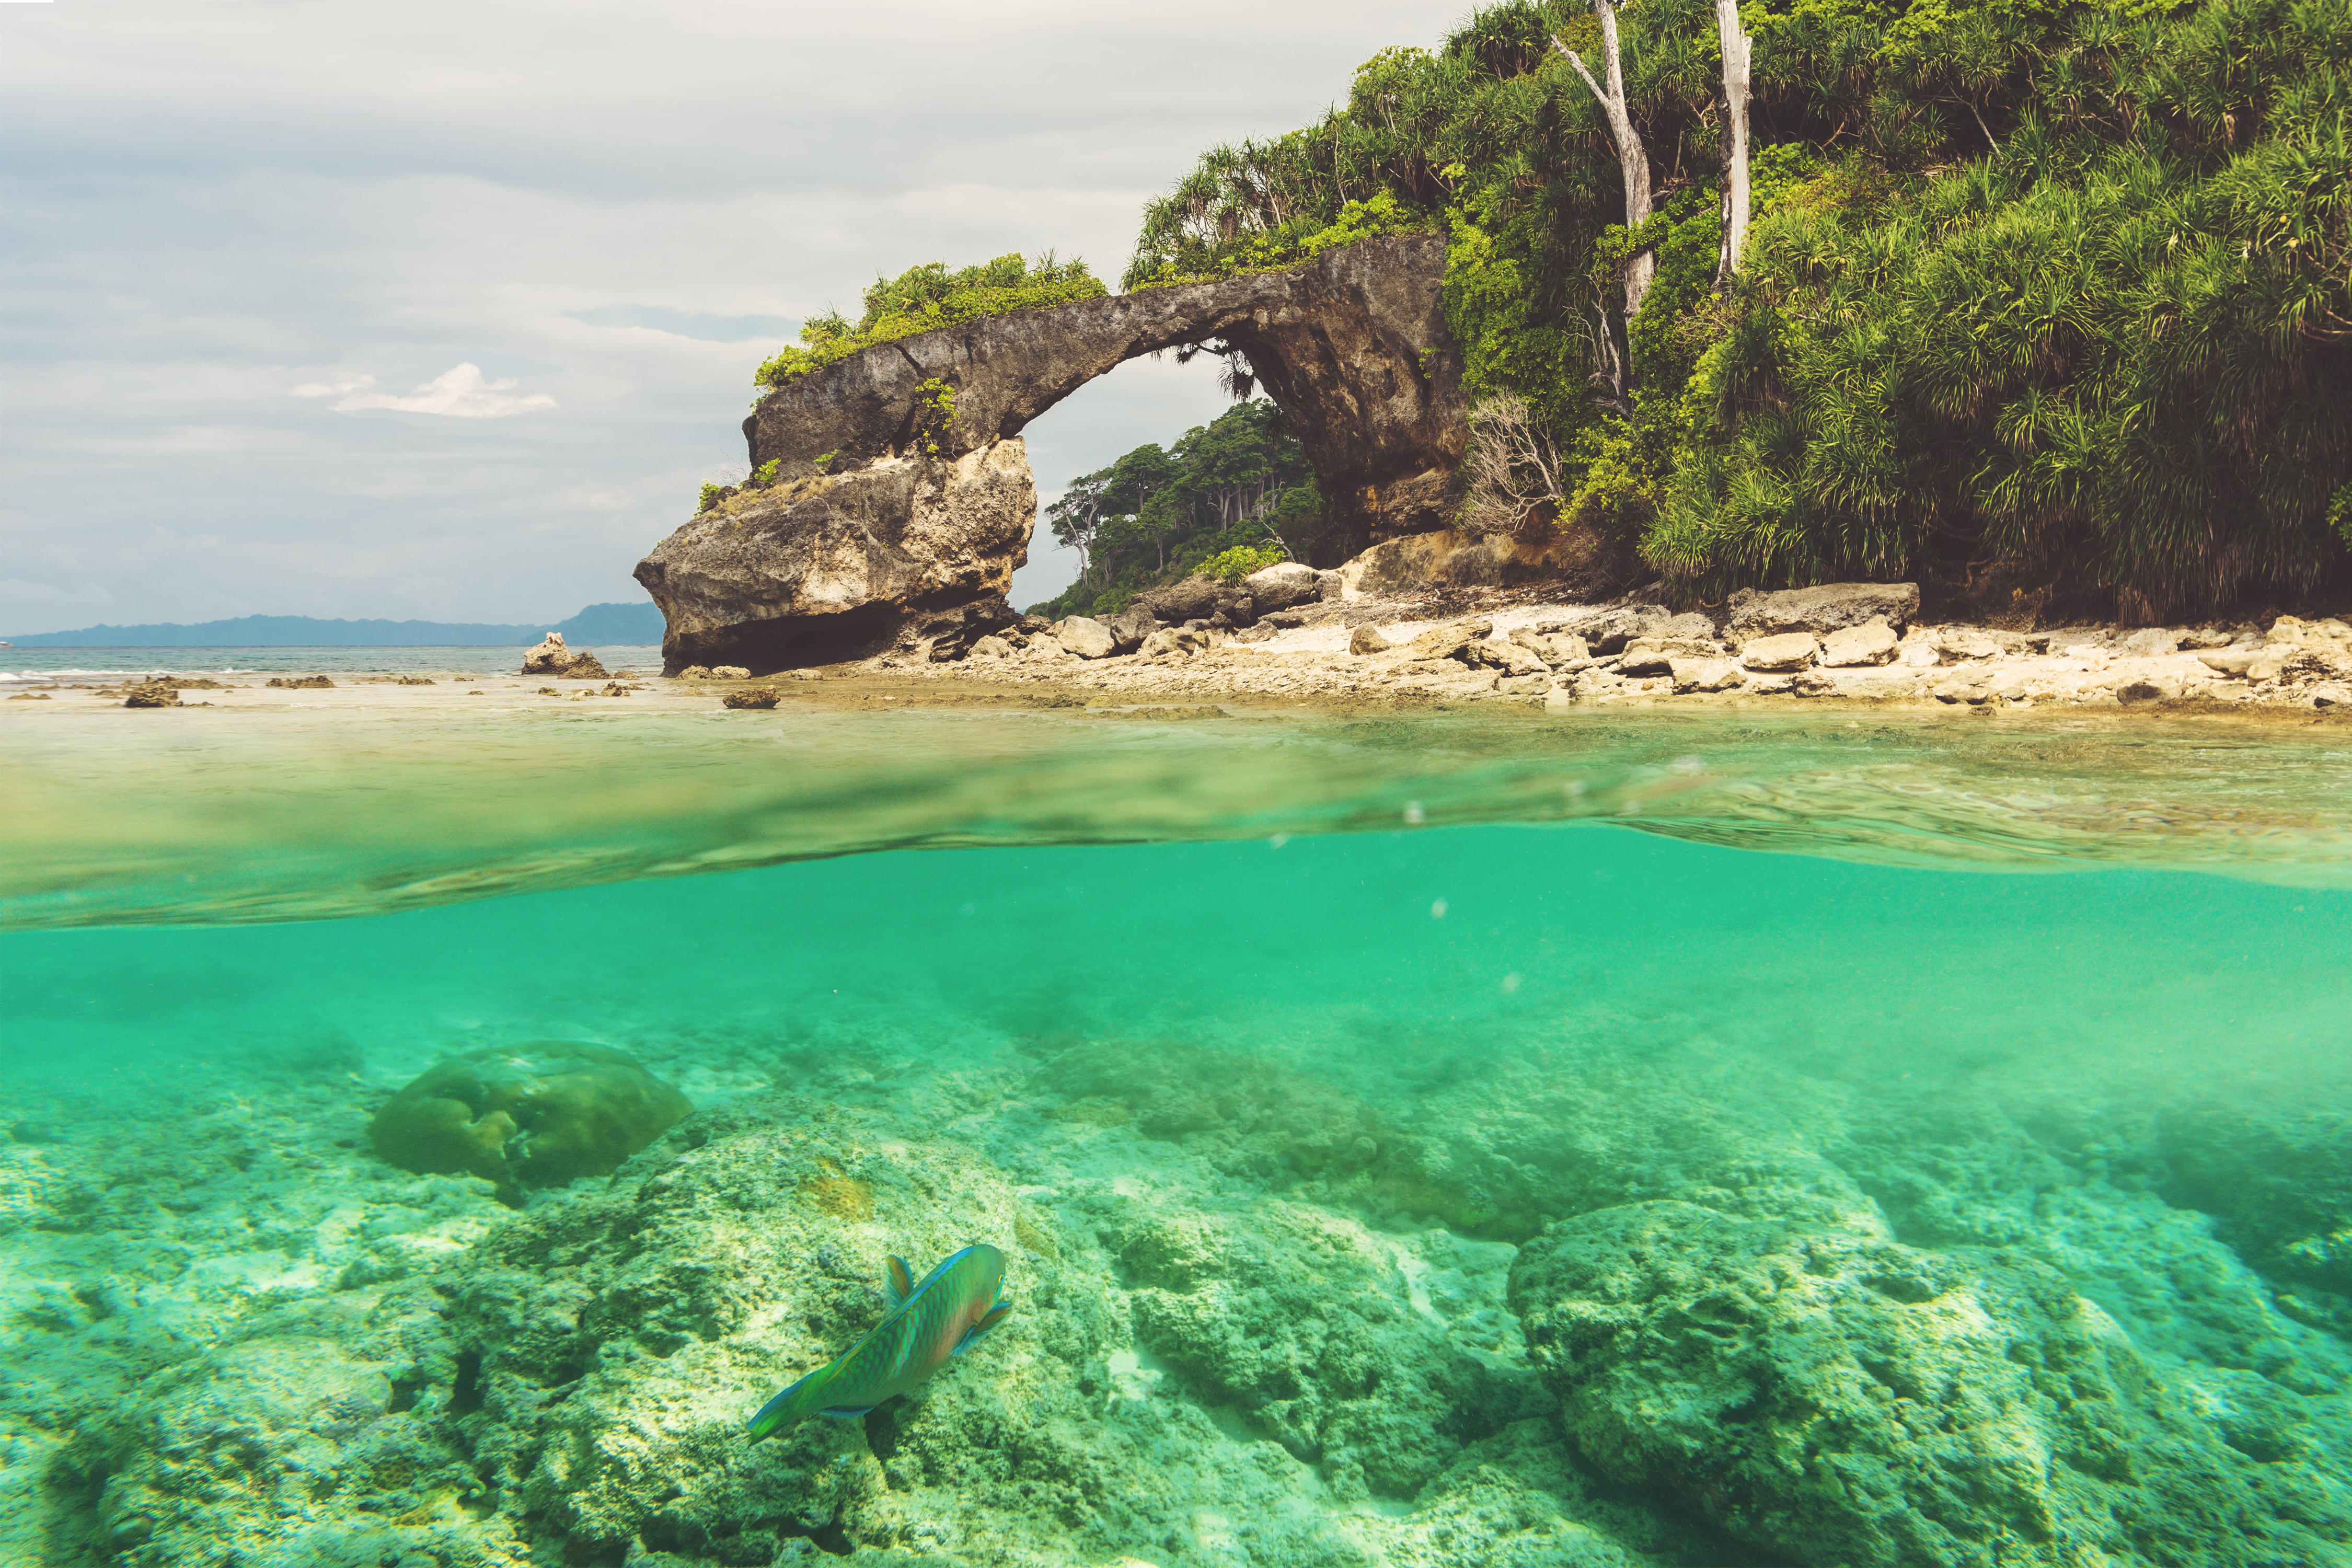 Things to Do in Andaman and Nicobar